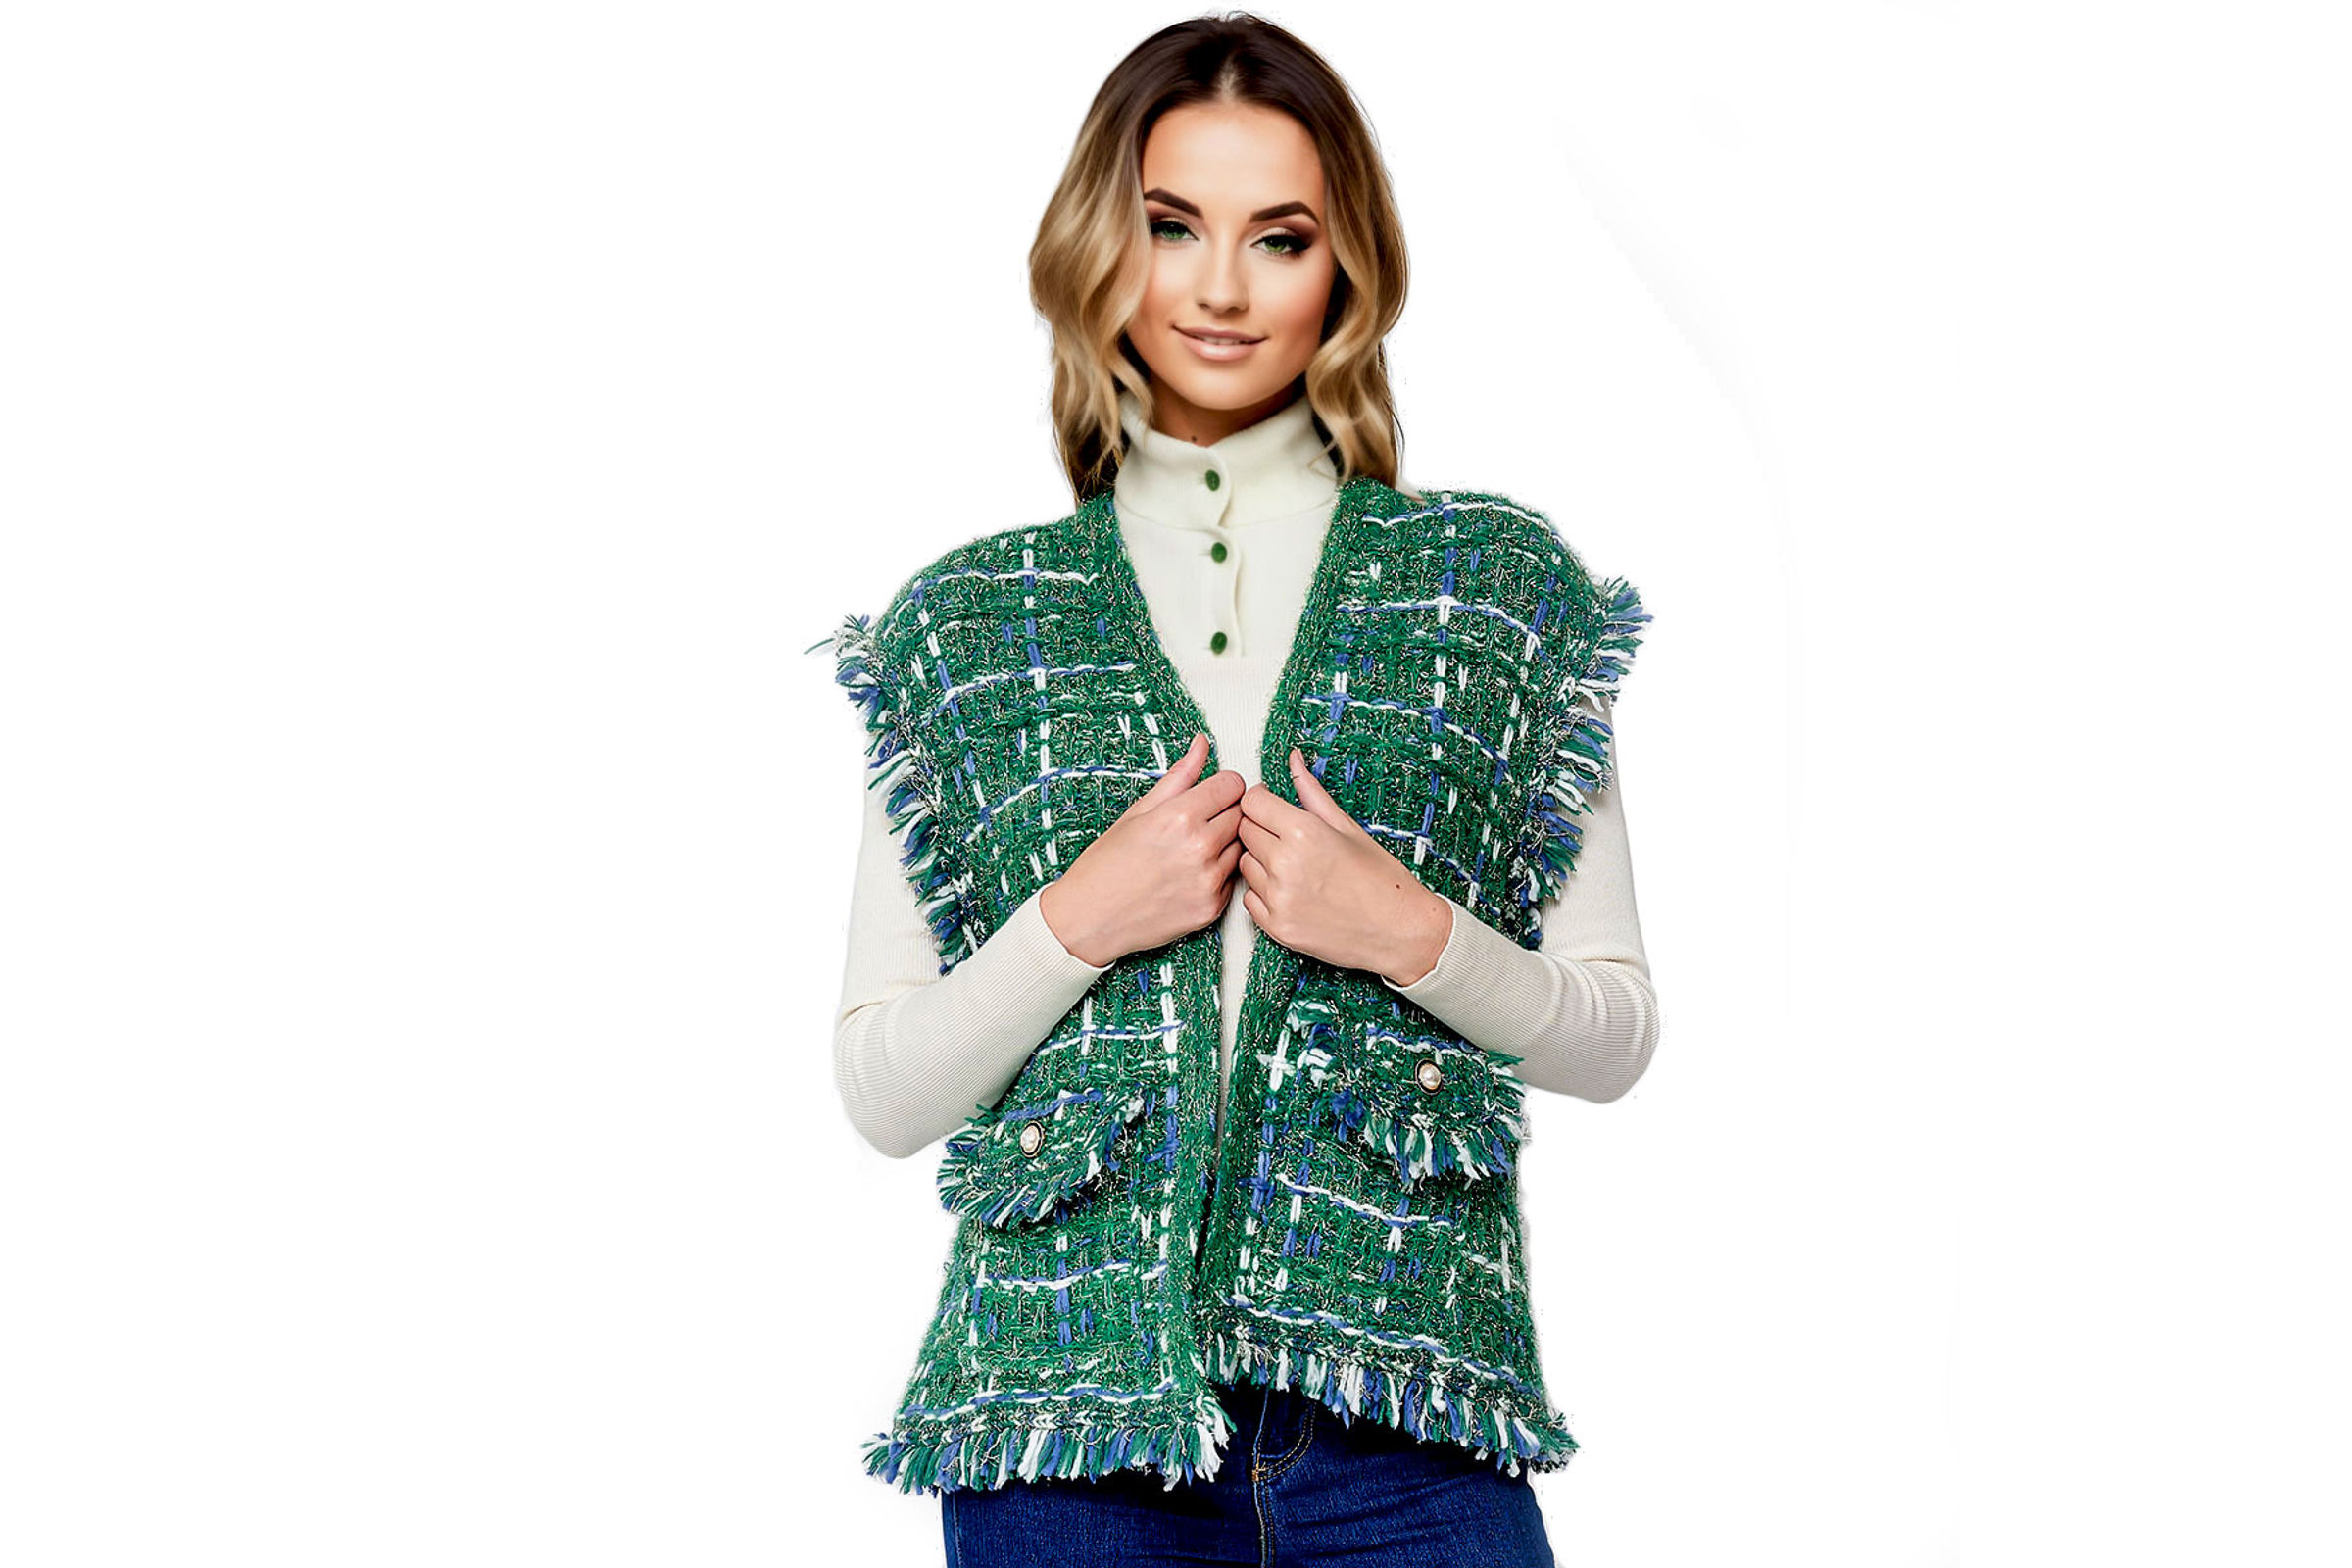 Silver Threaded Luxe High Quality Tweed Green Vest